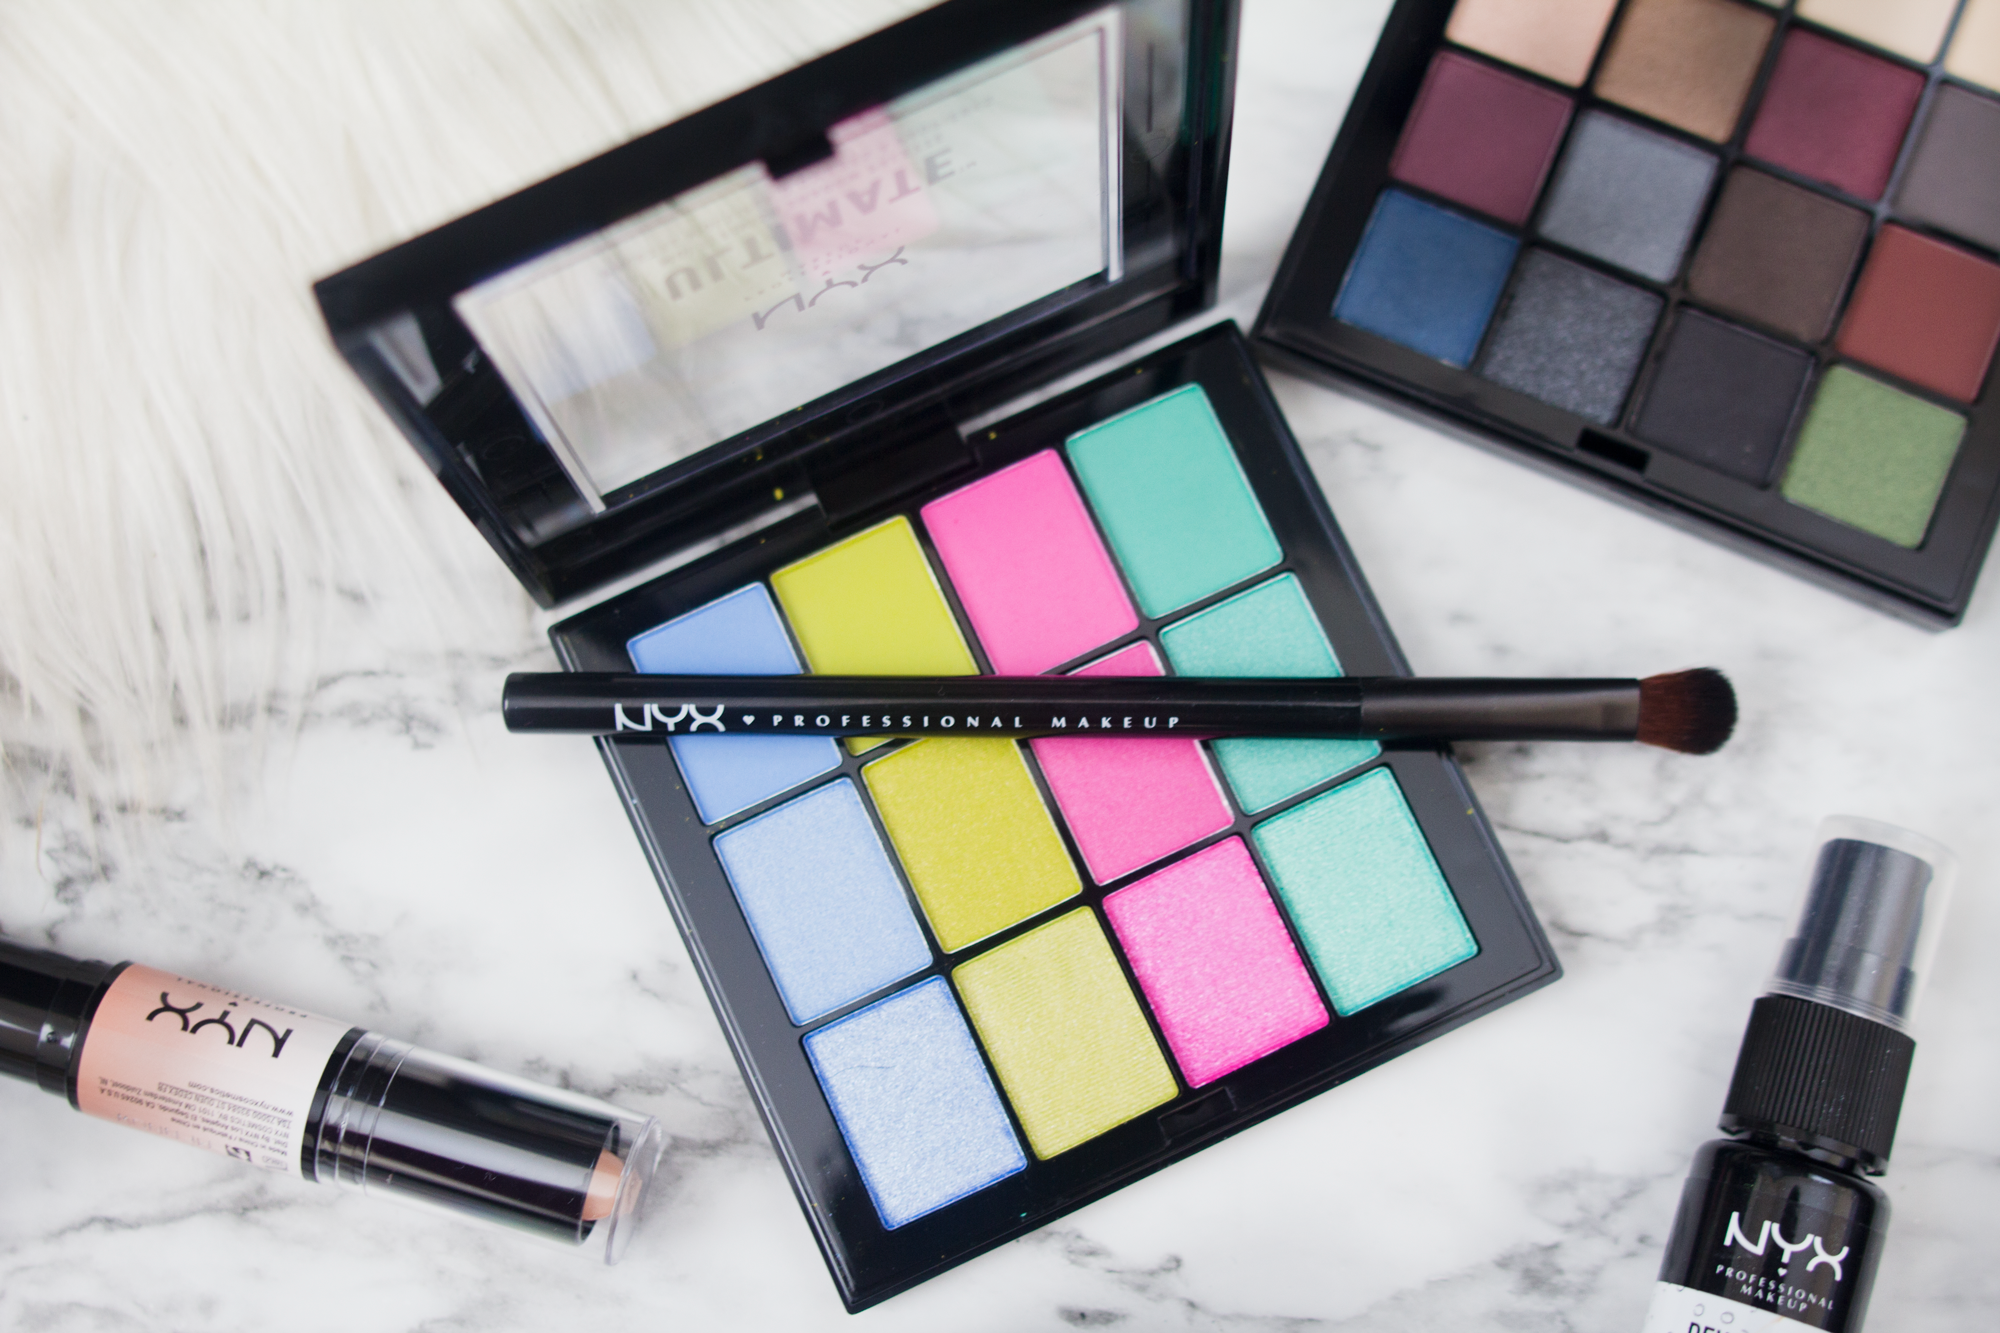 Best Nyx Makeup Products